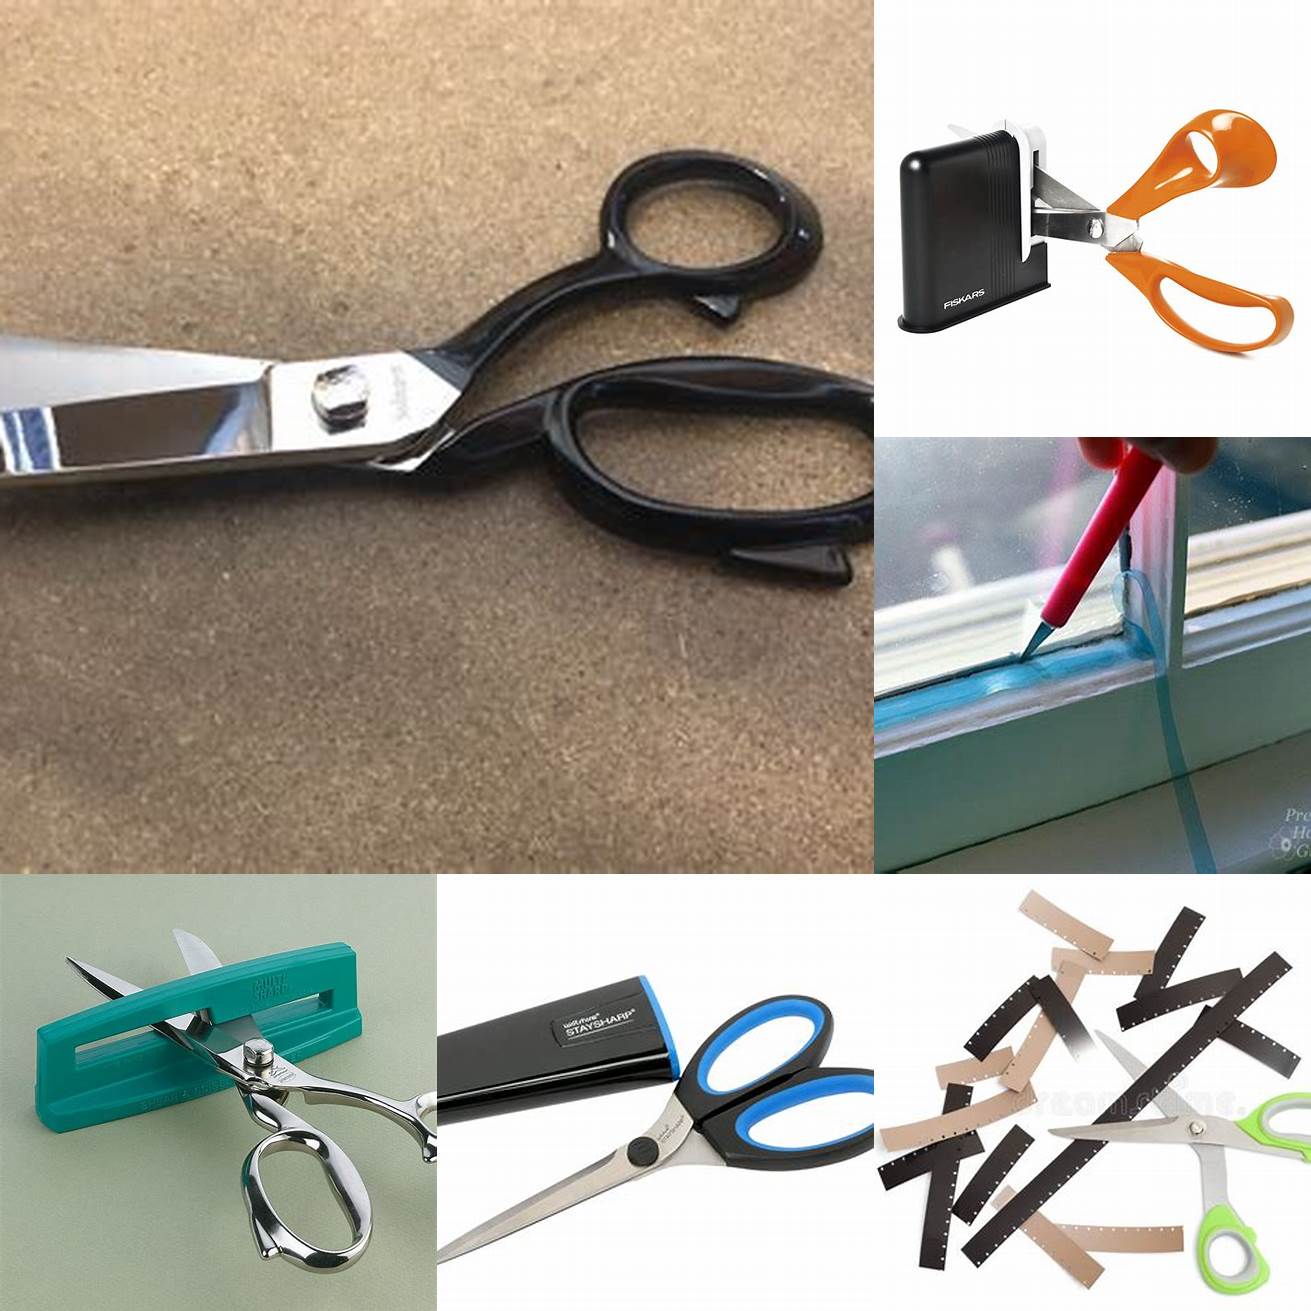 Trim any excess film with a sharp scissors or blade